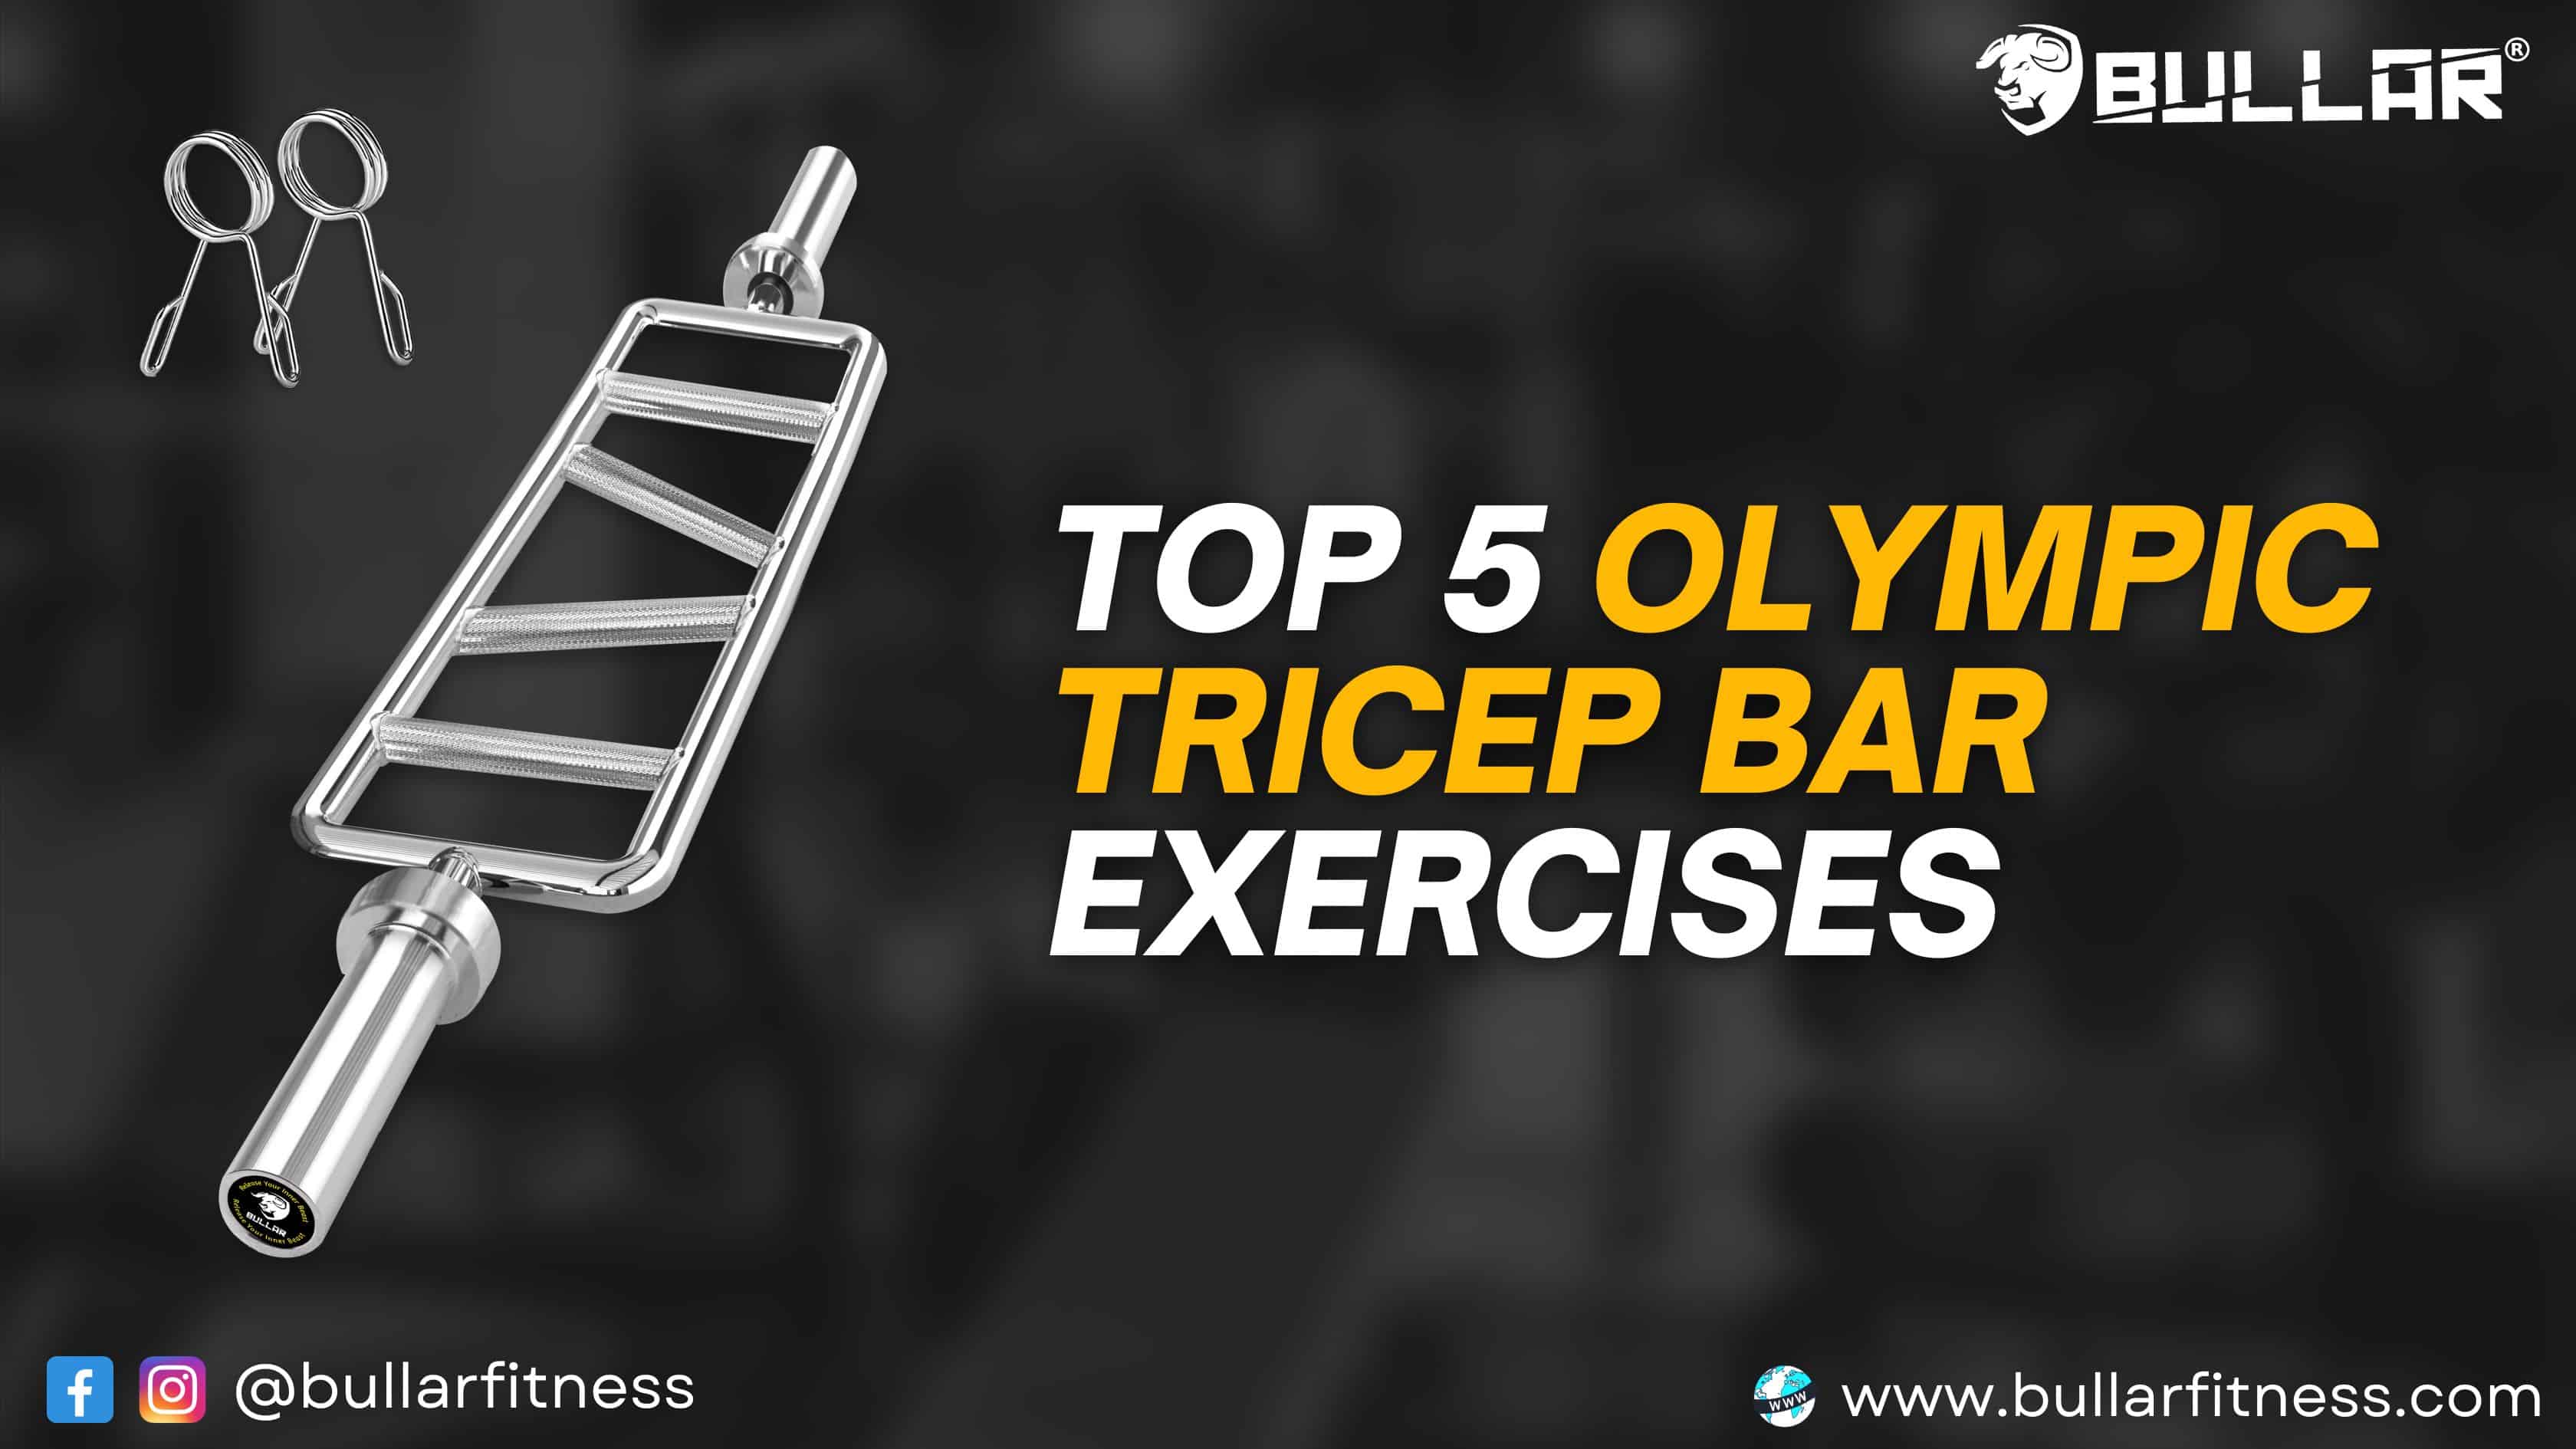 TOP 5 OLYMPIC TRICEP BAR EXERCISES